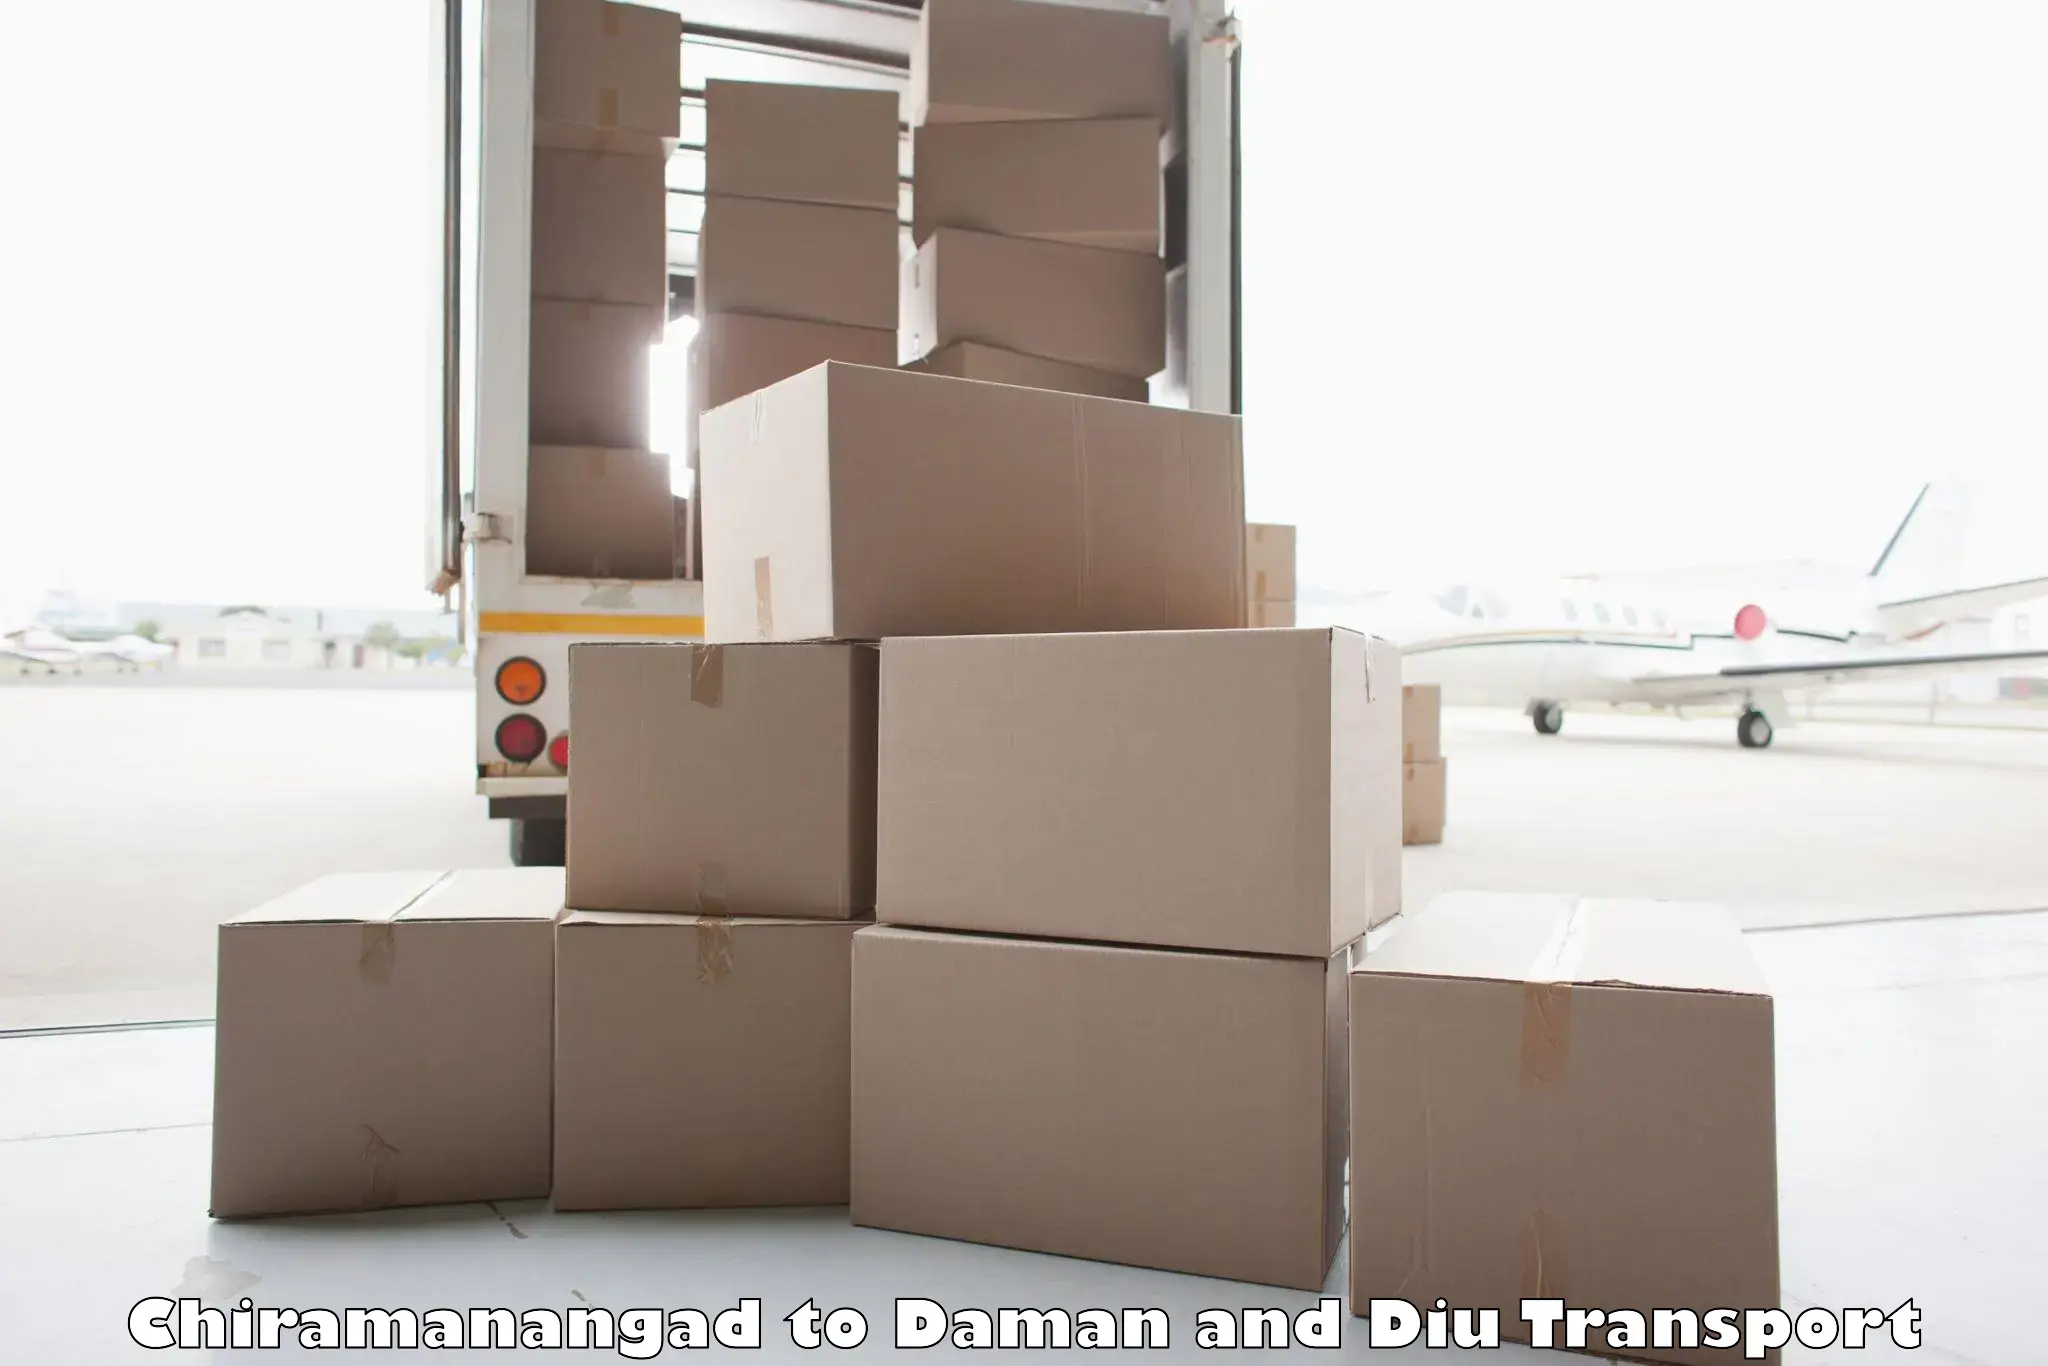 Commercial transport service Chiramanangad to Diu